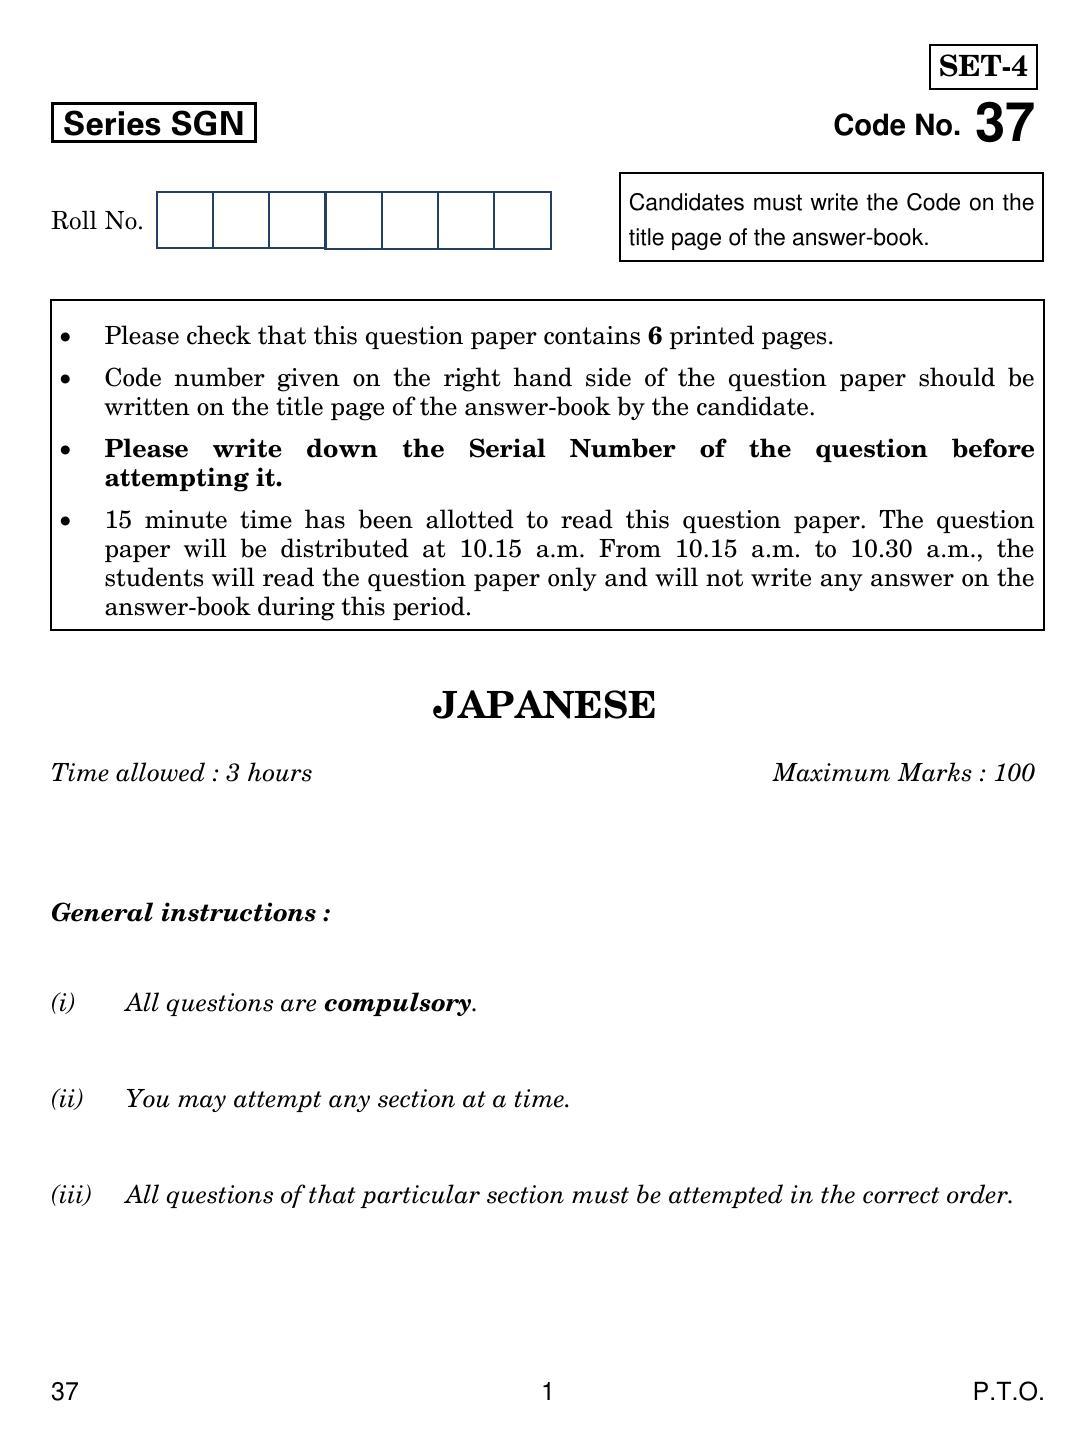 CBSE Class 12 37 JAPANESE 2018 Question Paper - Page 1